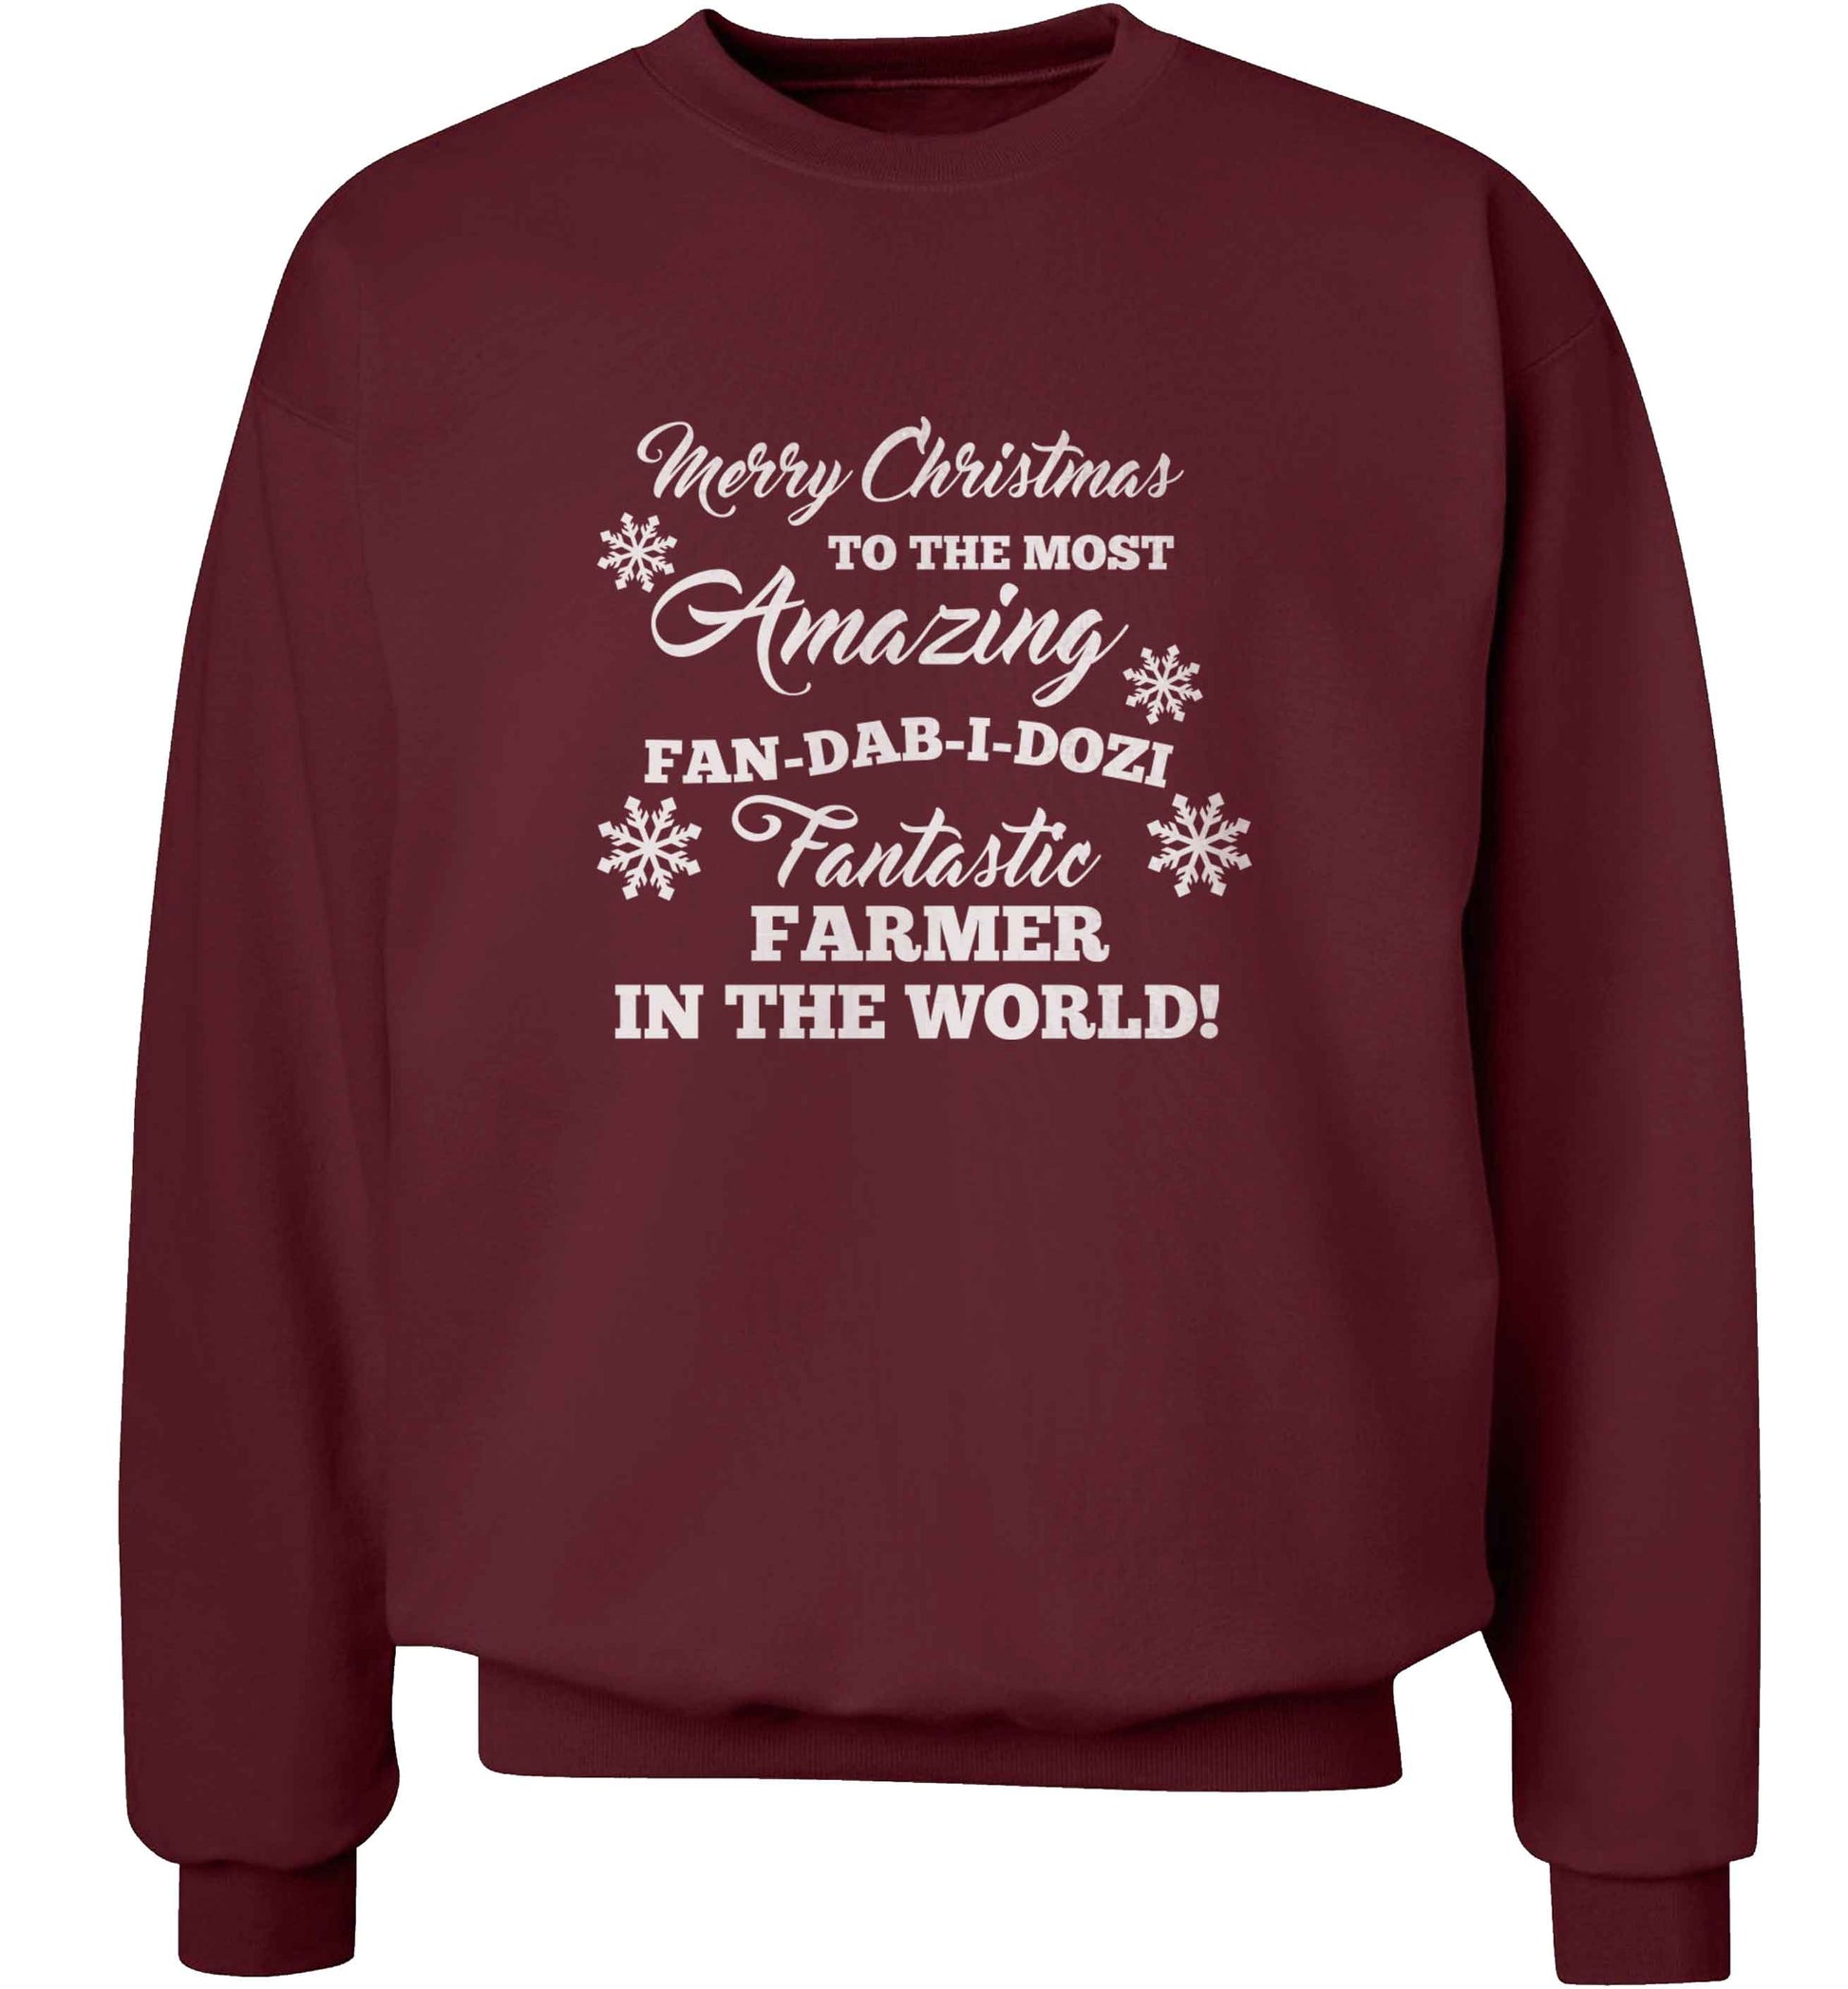 Merry Christmas to the most amazing farmer in the world! adult's unisex maroon sweater 2XL